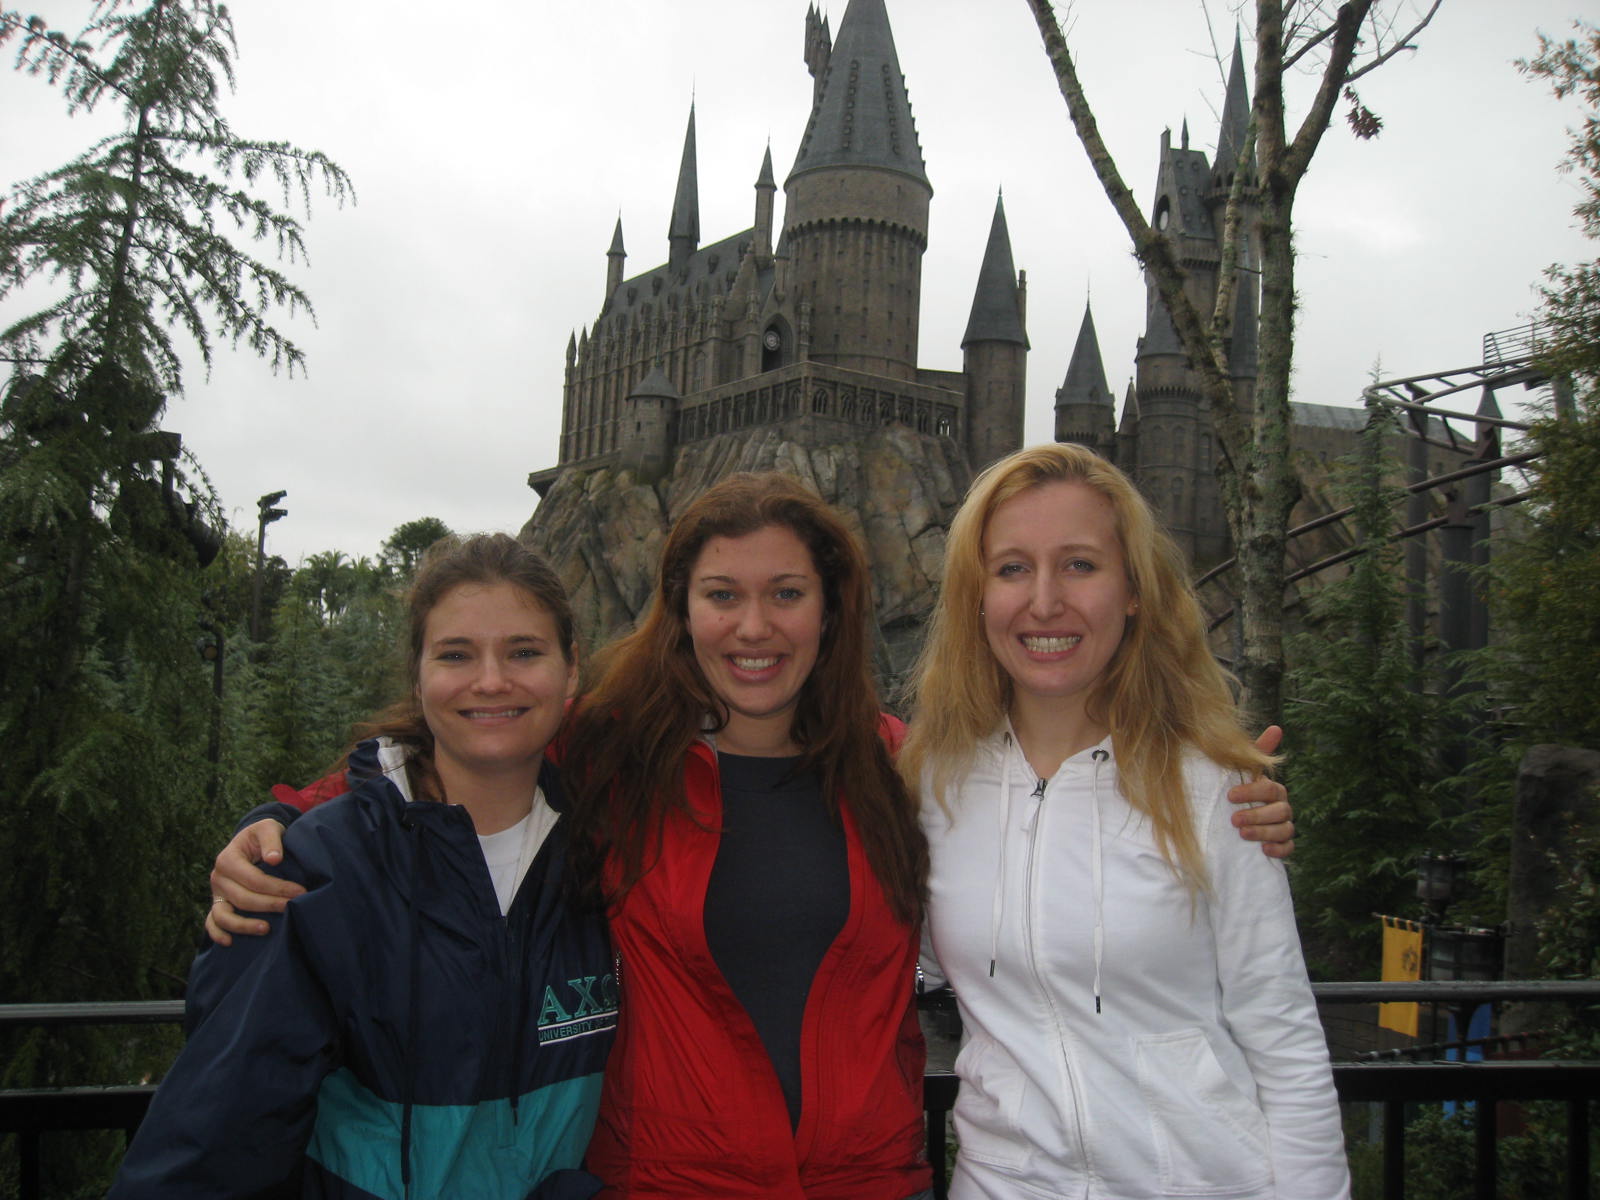 A frugal review of The Wizarding World of Harry Potter